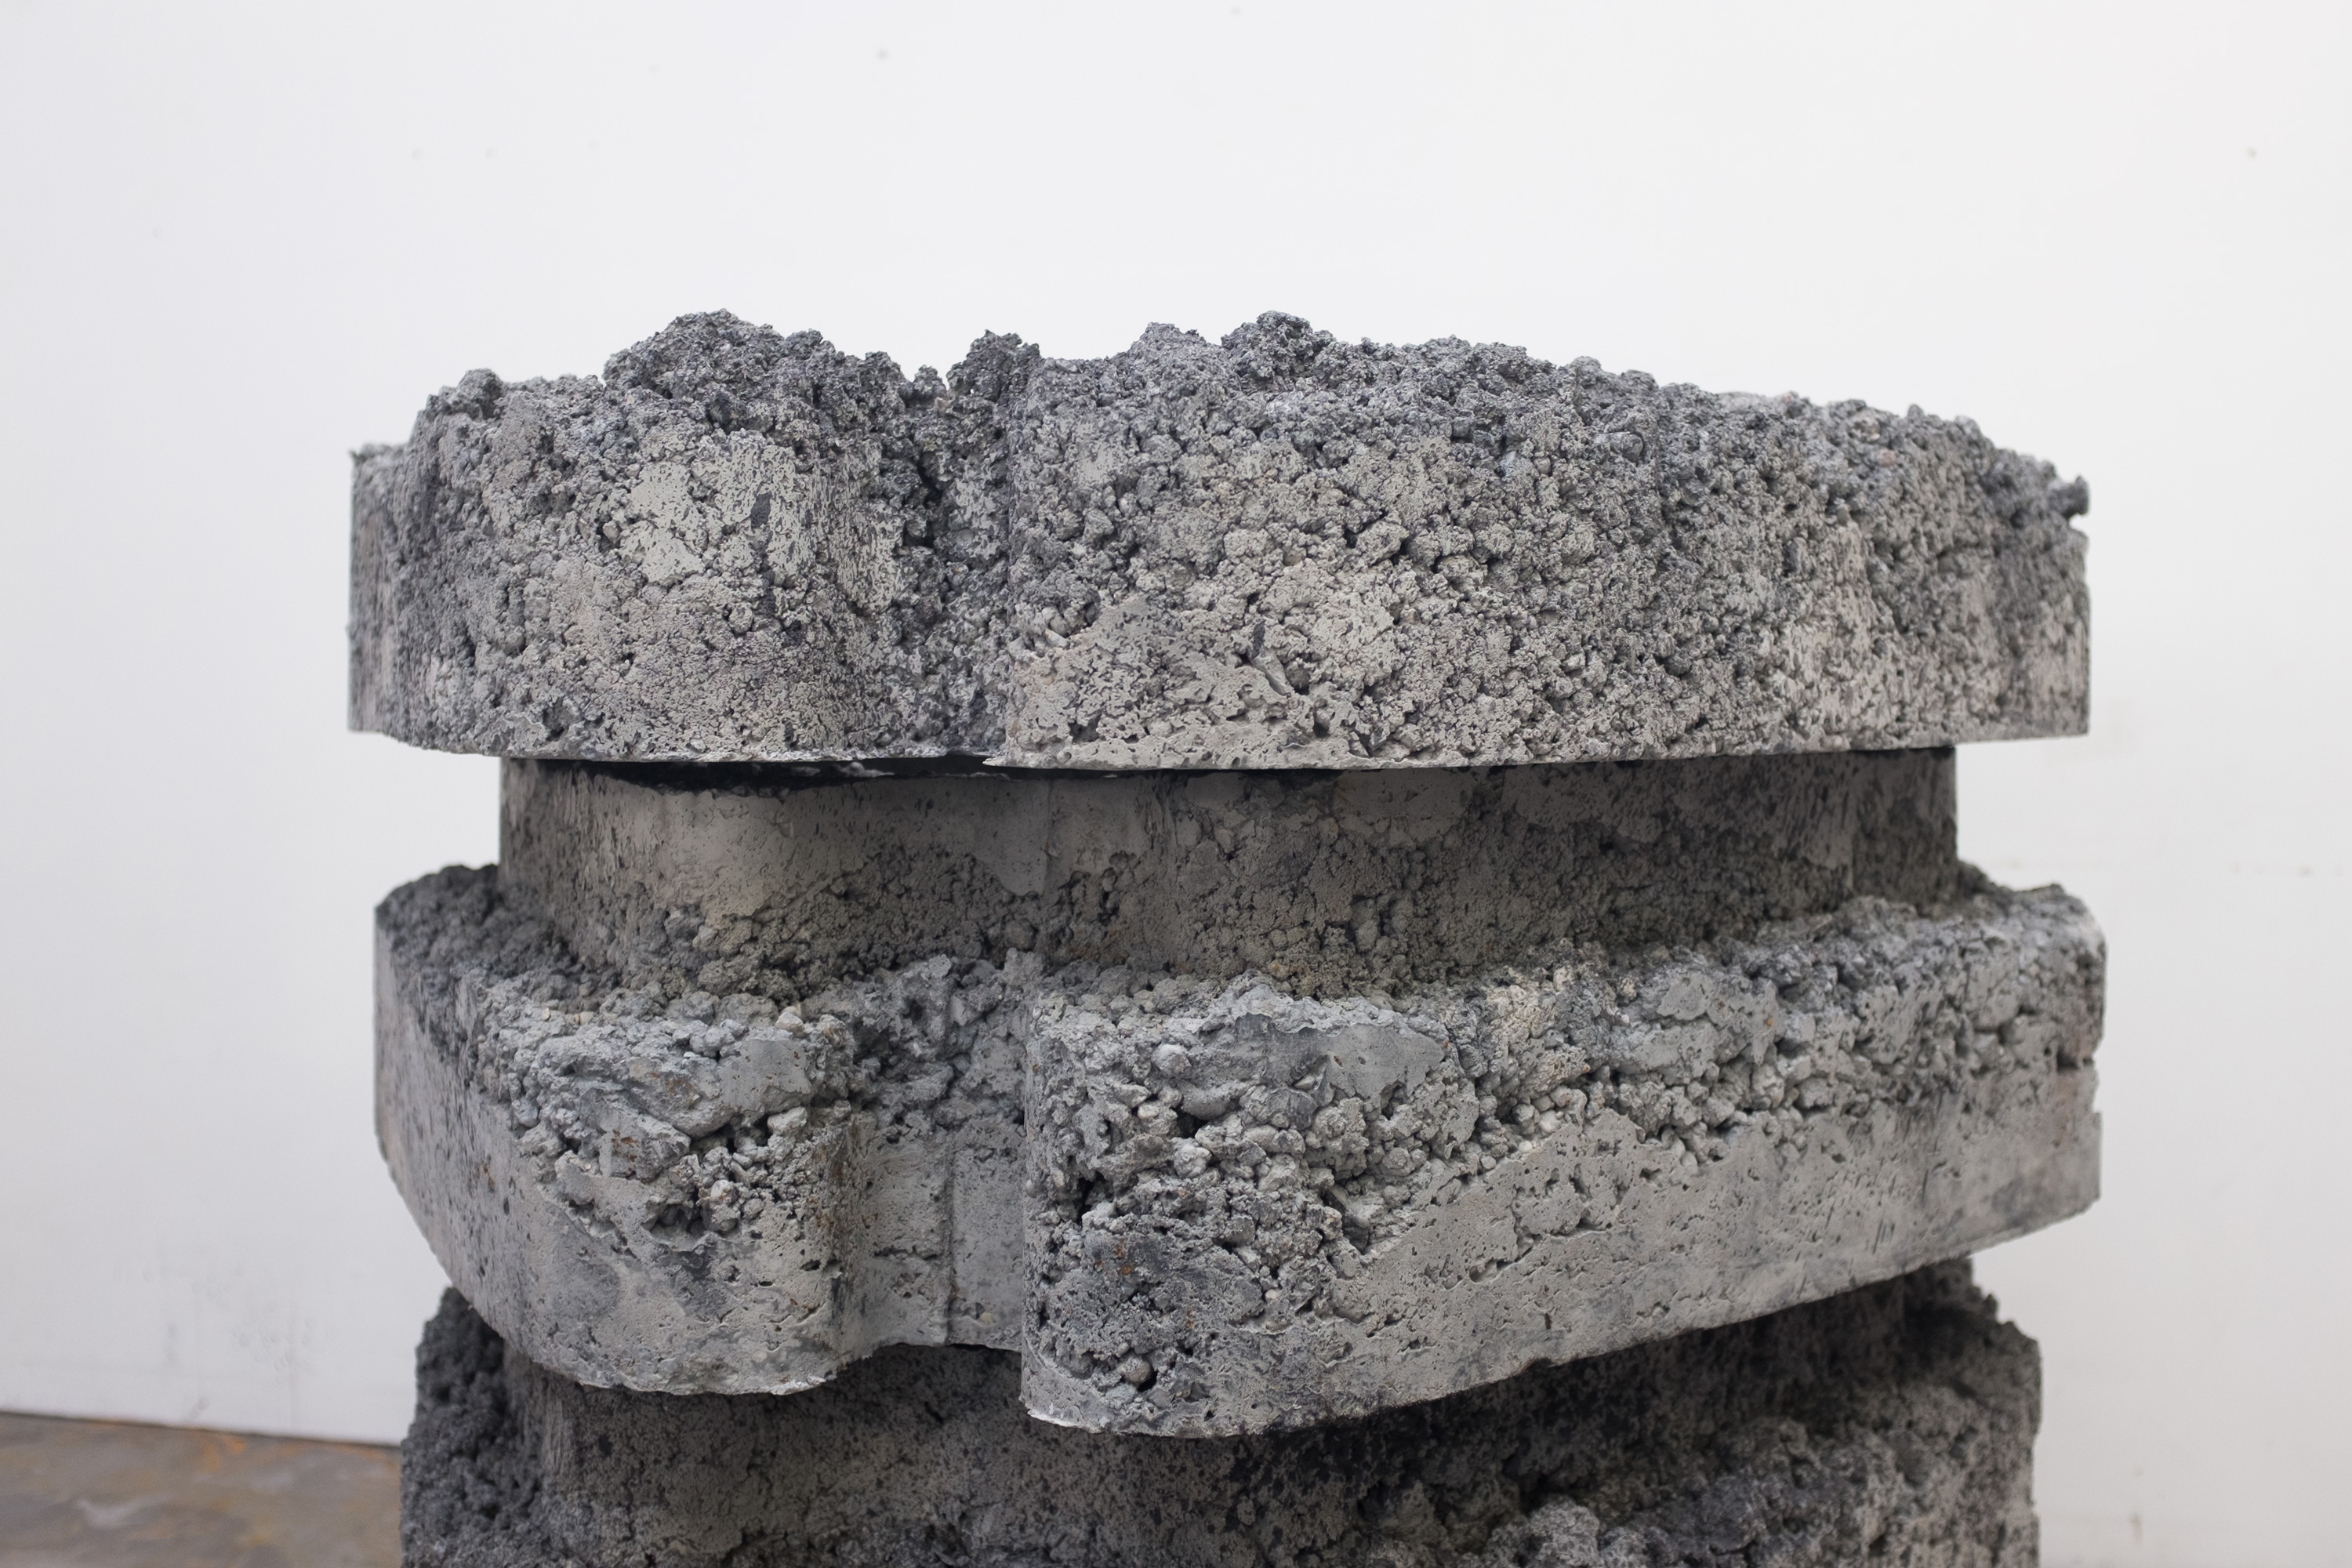 Tiril Hasselknippe, Balcony (ribbevegg) (detail), 2018, cast concrete, 40h x 34w x 41d in.